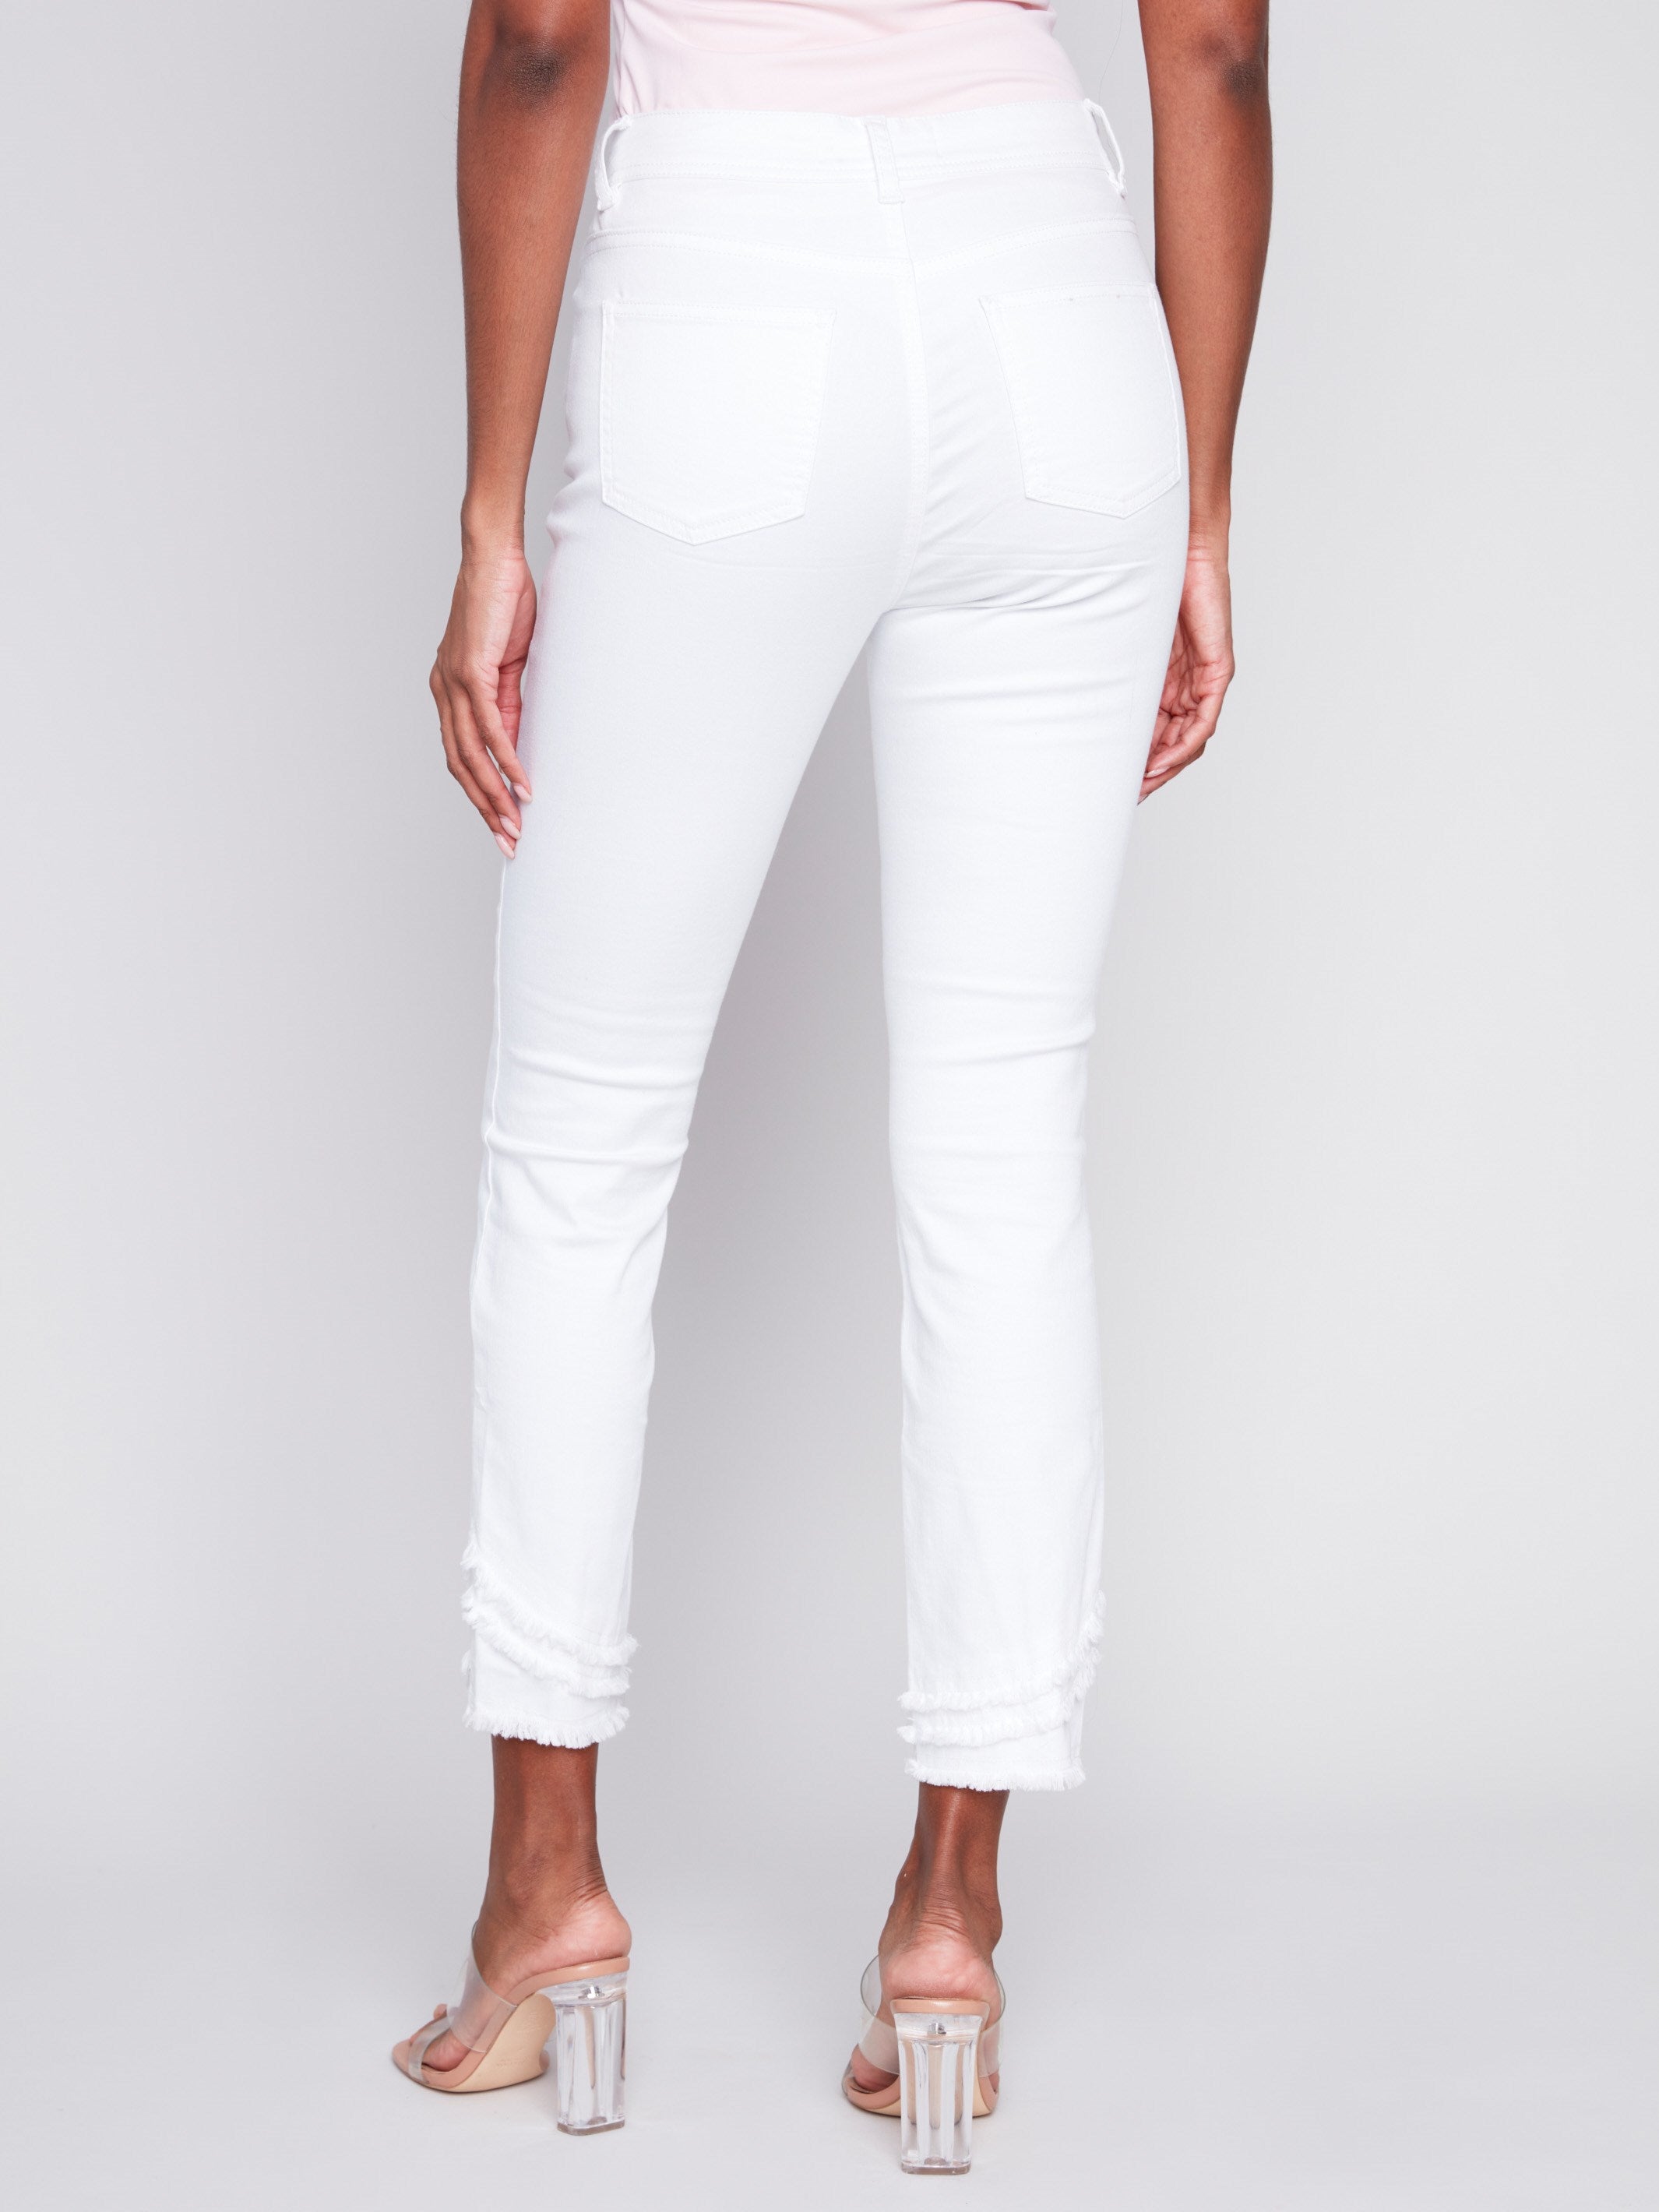 Frayed Hem Twill Pants - White - Charlie B Collection Canada - Image 3